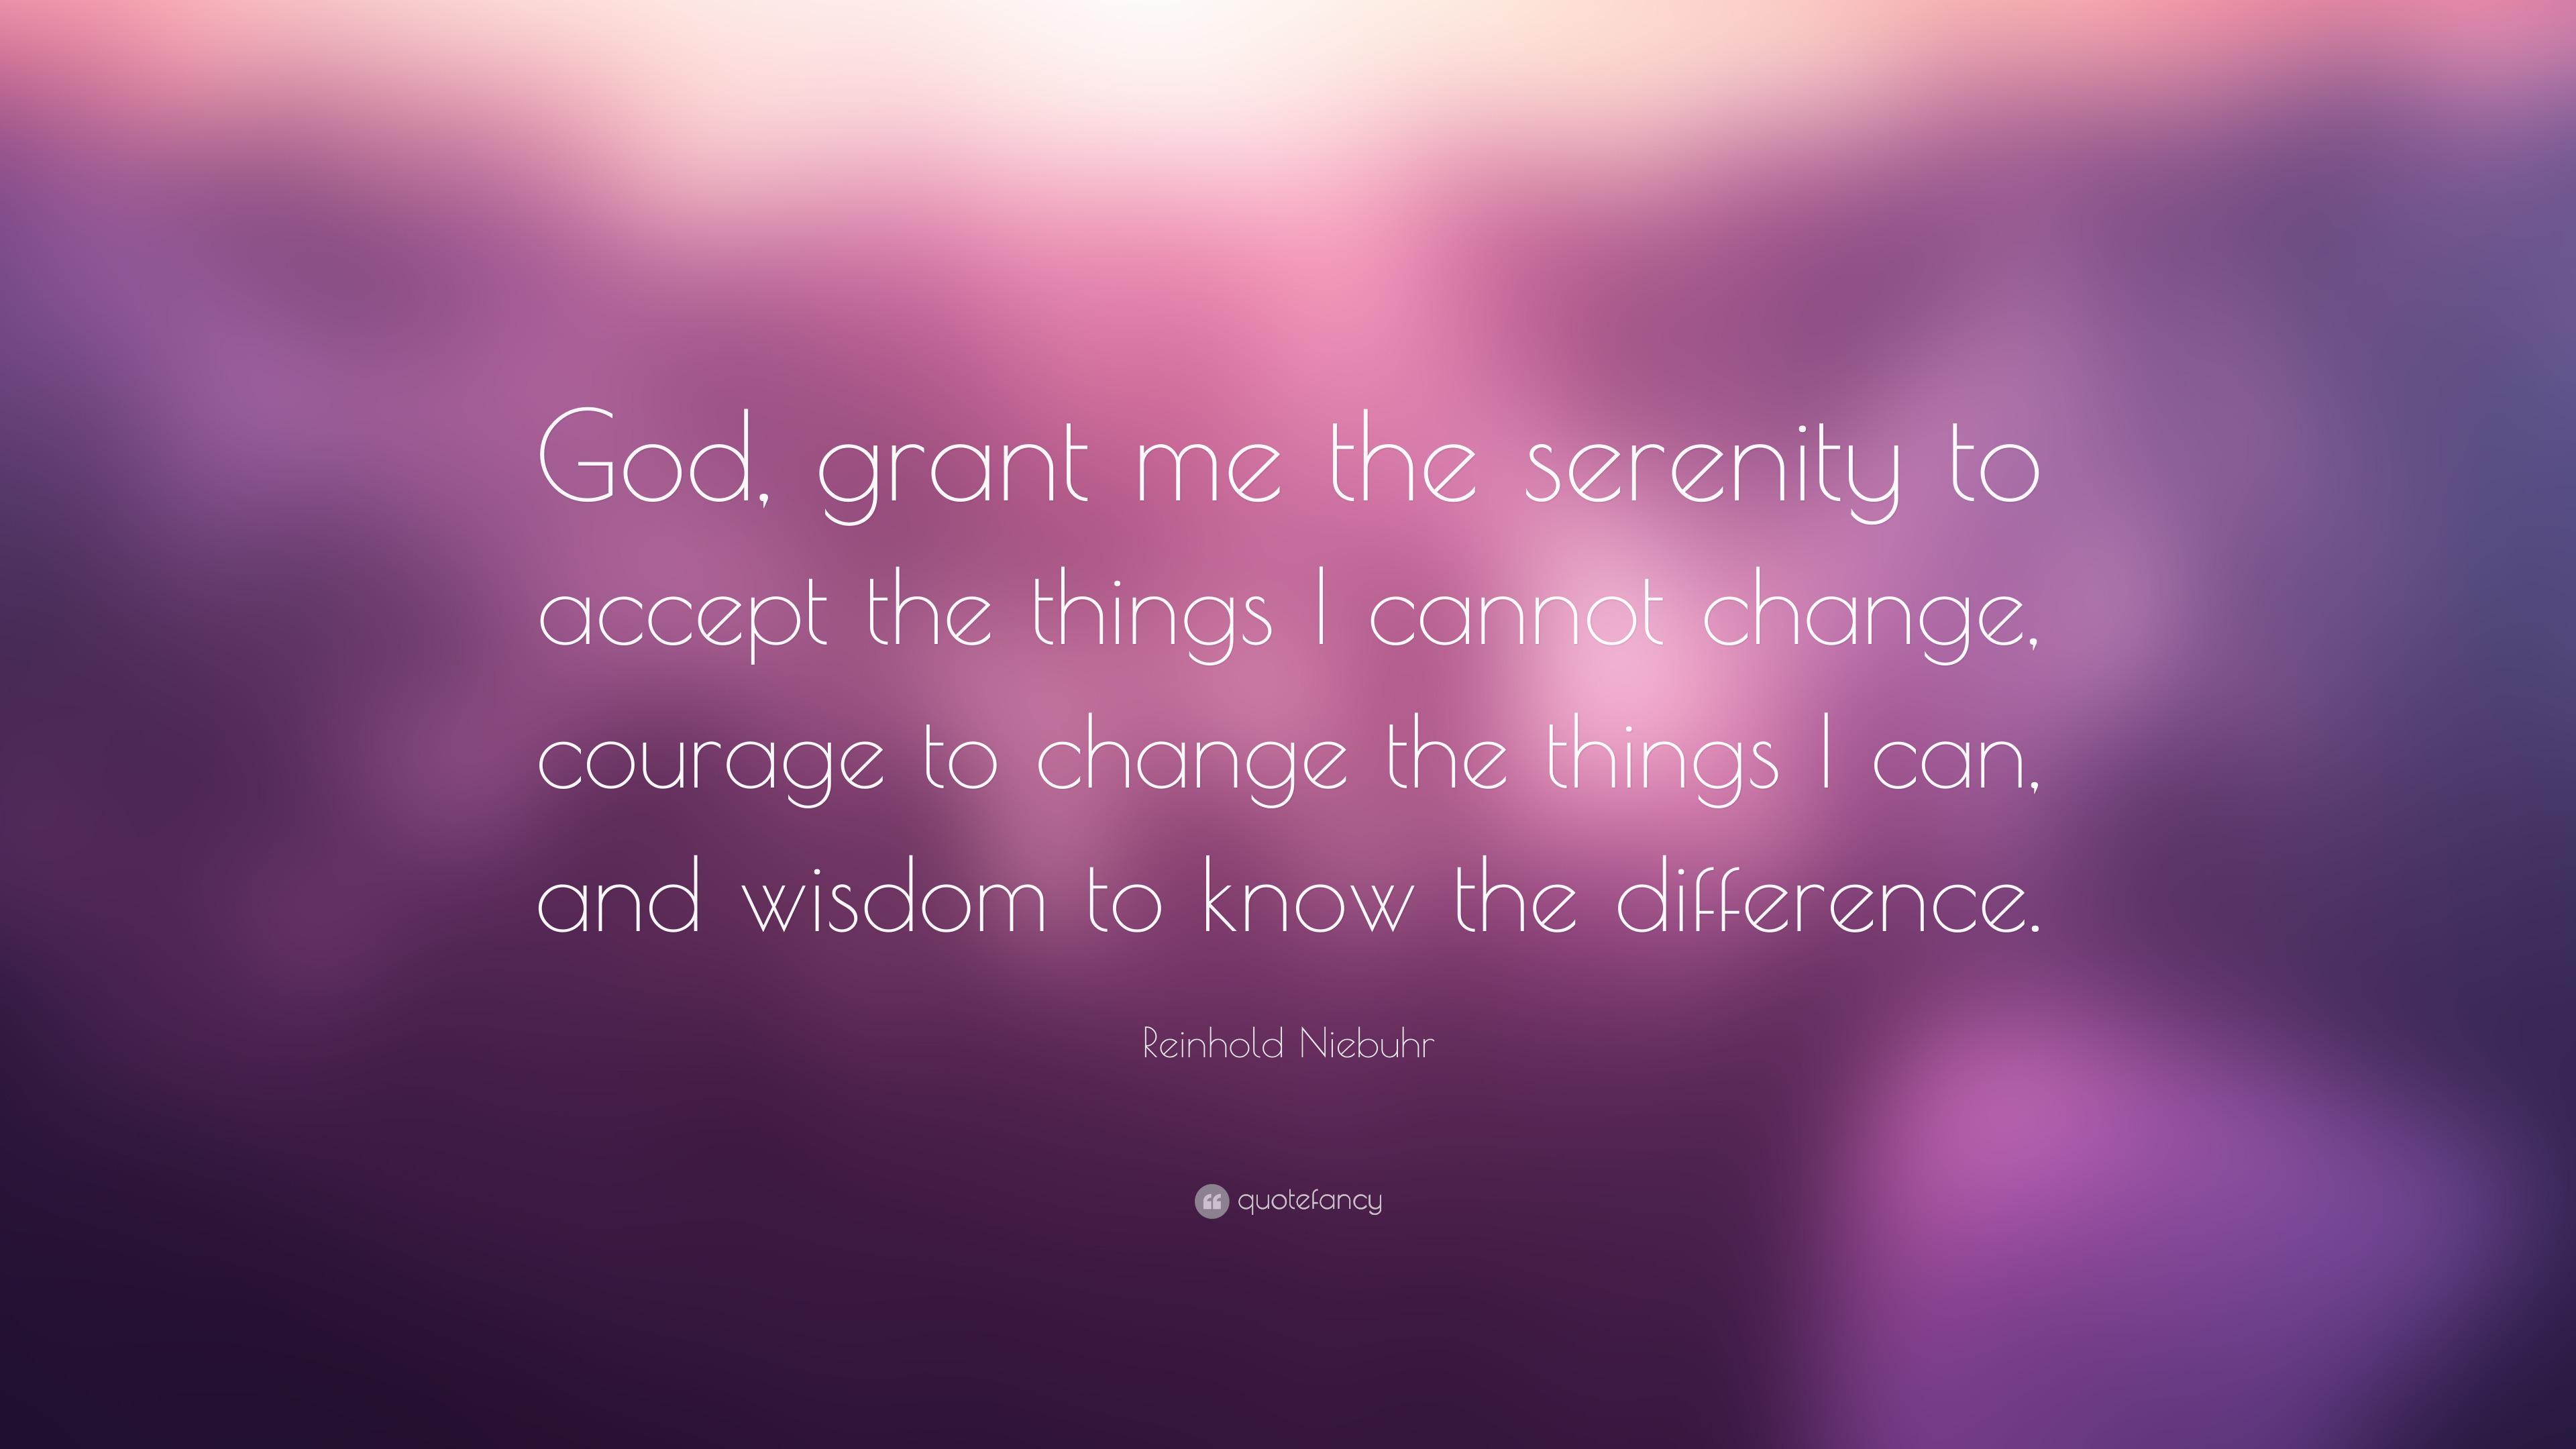 Serenity Prayer Quote: “God, grant me the serenity to accept the things ...